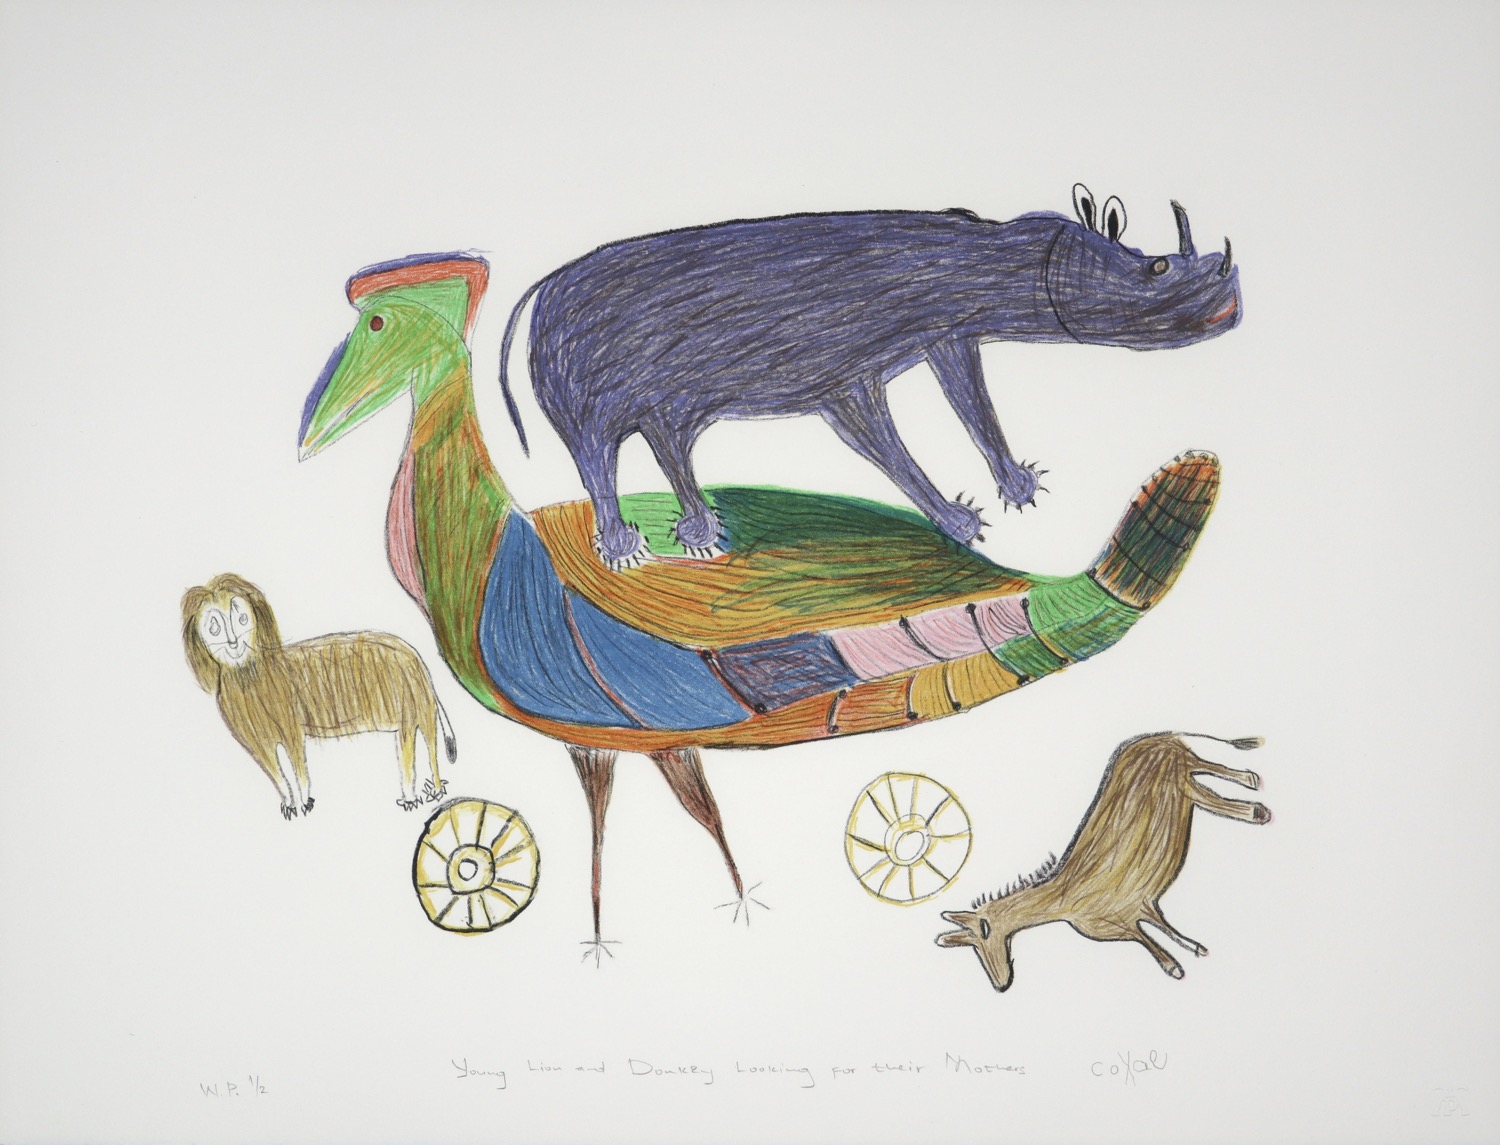 A purple rhino, colourful bird, small lion and donkey and two-wheel forms